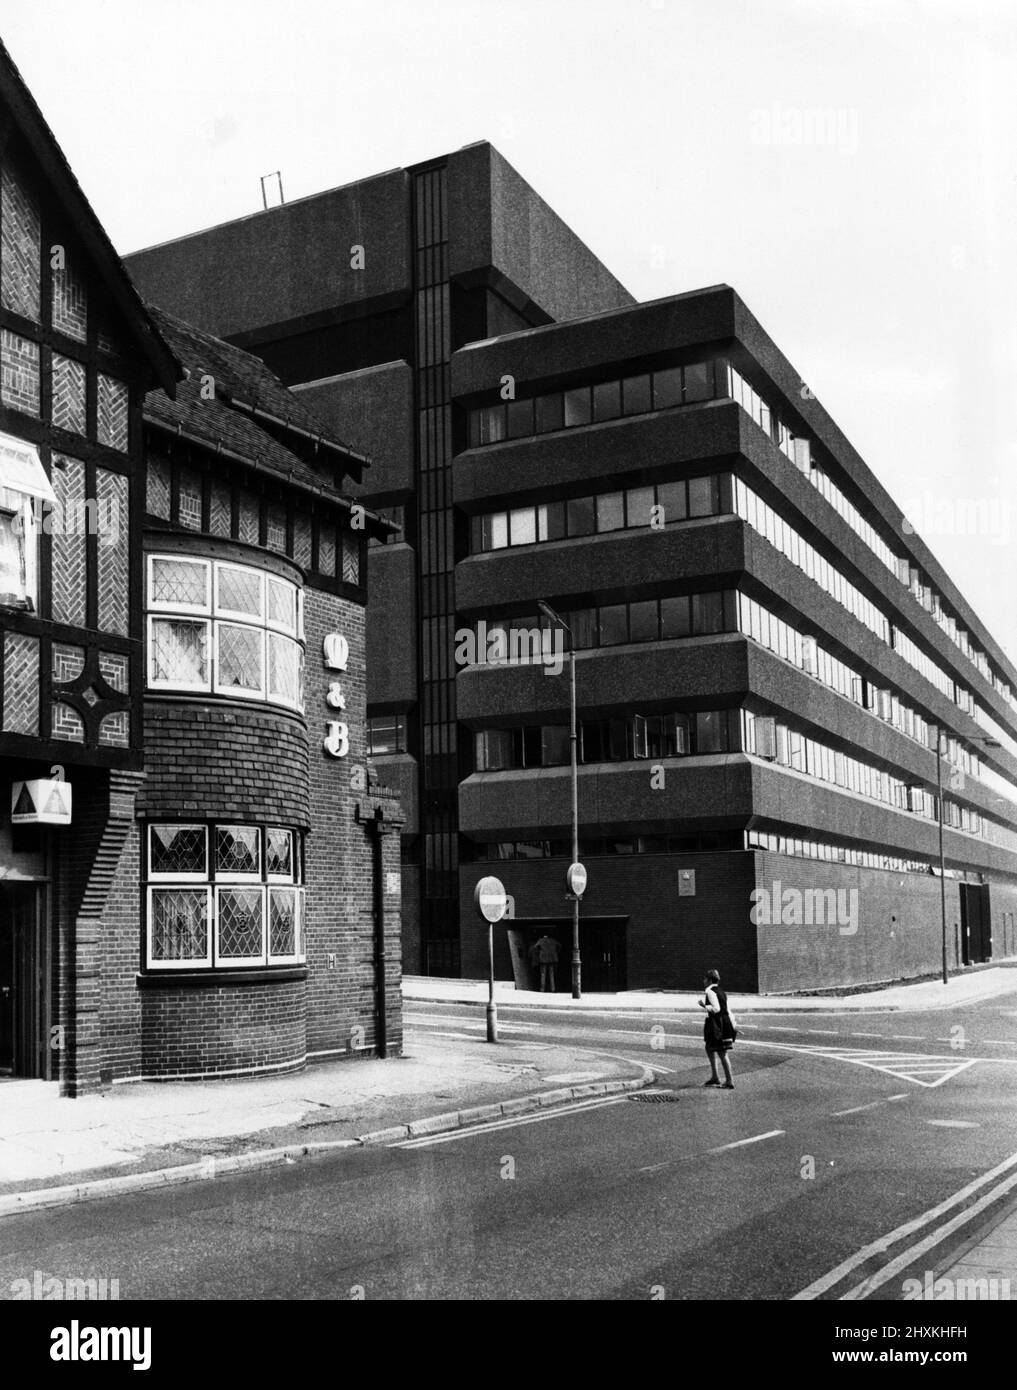 Coventry's new head post office cost £2,600,000, has nearly four acres of floor space and will employ 800 people. The building, in Bishop Street, replaces seven other offices scattered around Coventry. 13th August 1976. Stock Photo